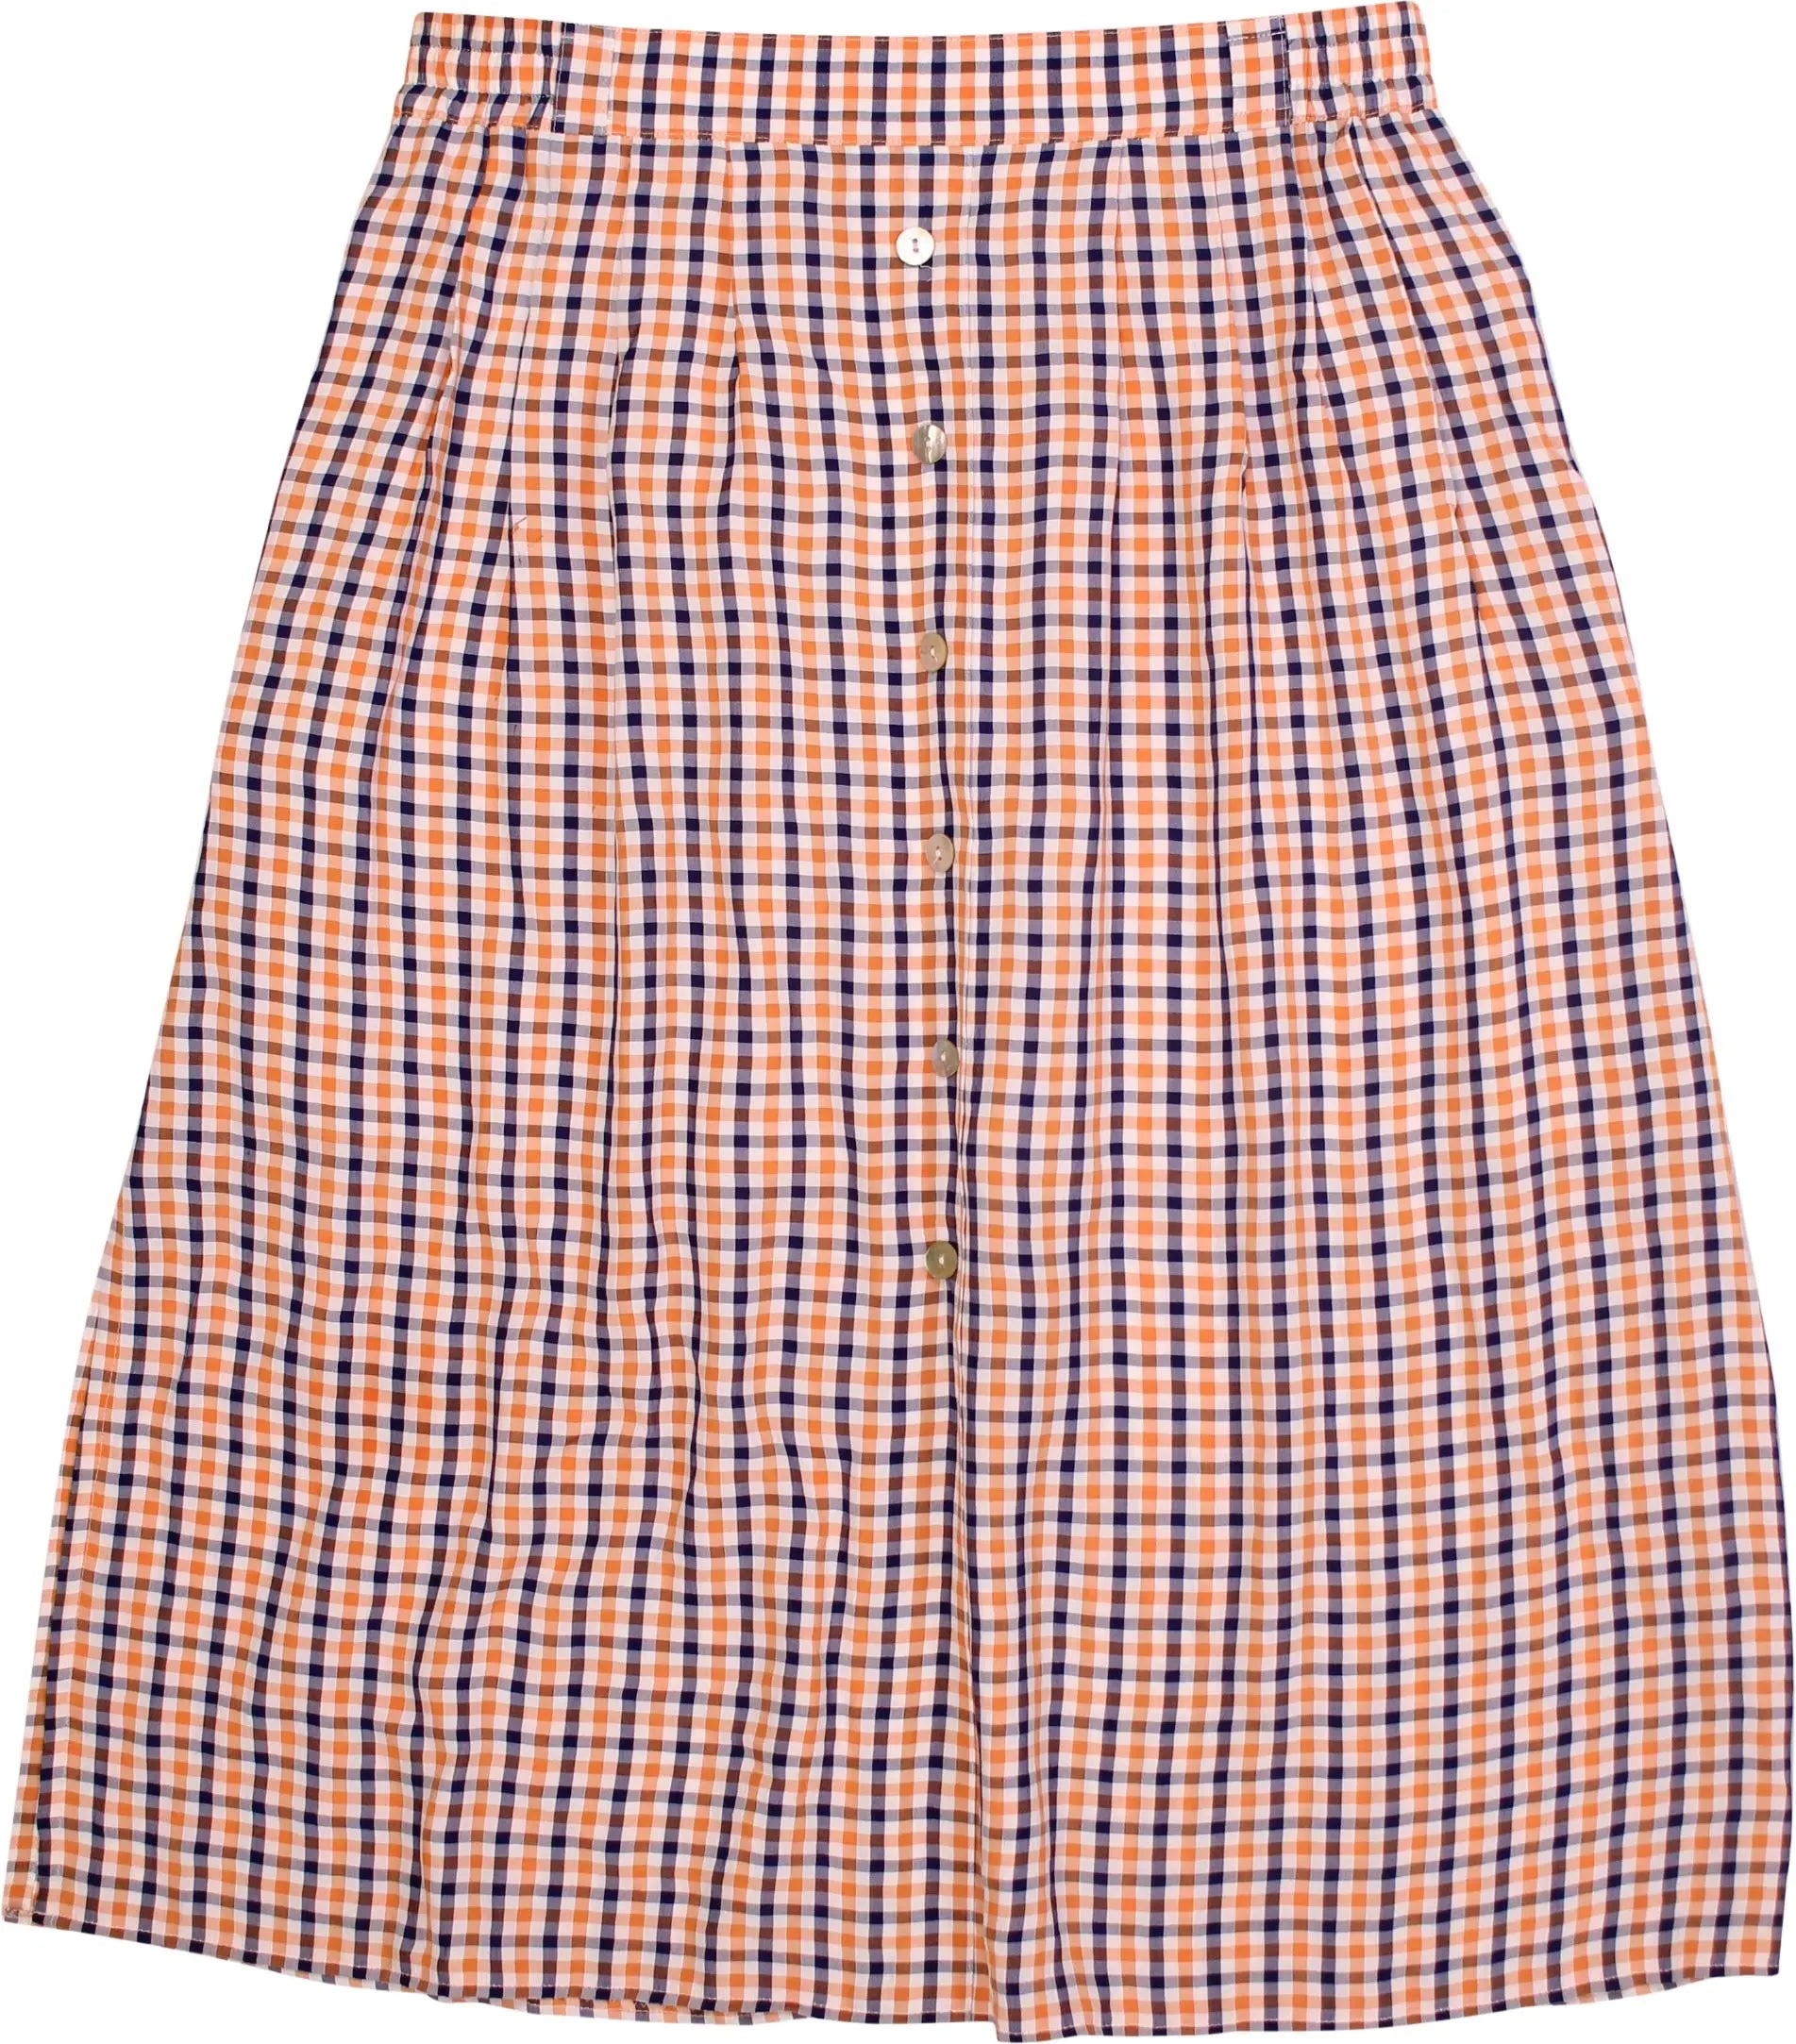 C&A - Vintage Checked Skirt by Yessica- ThriftTale.com - Vintage and second handclothing